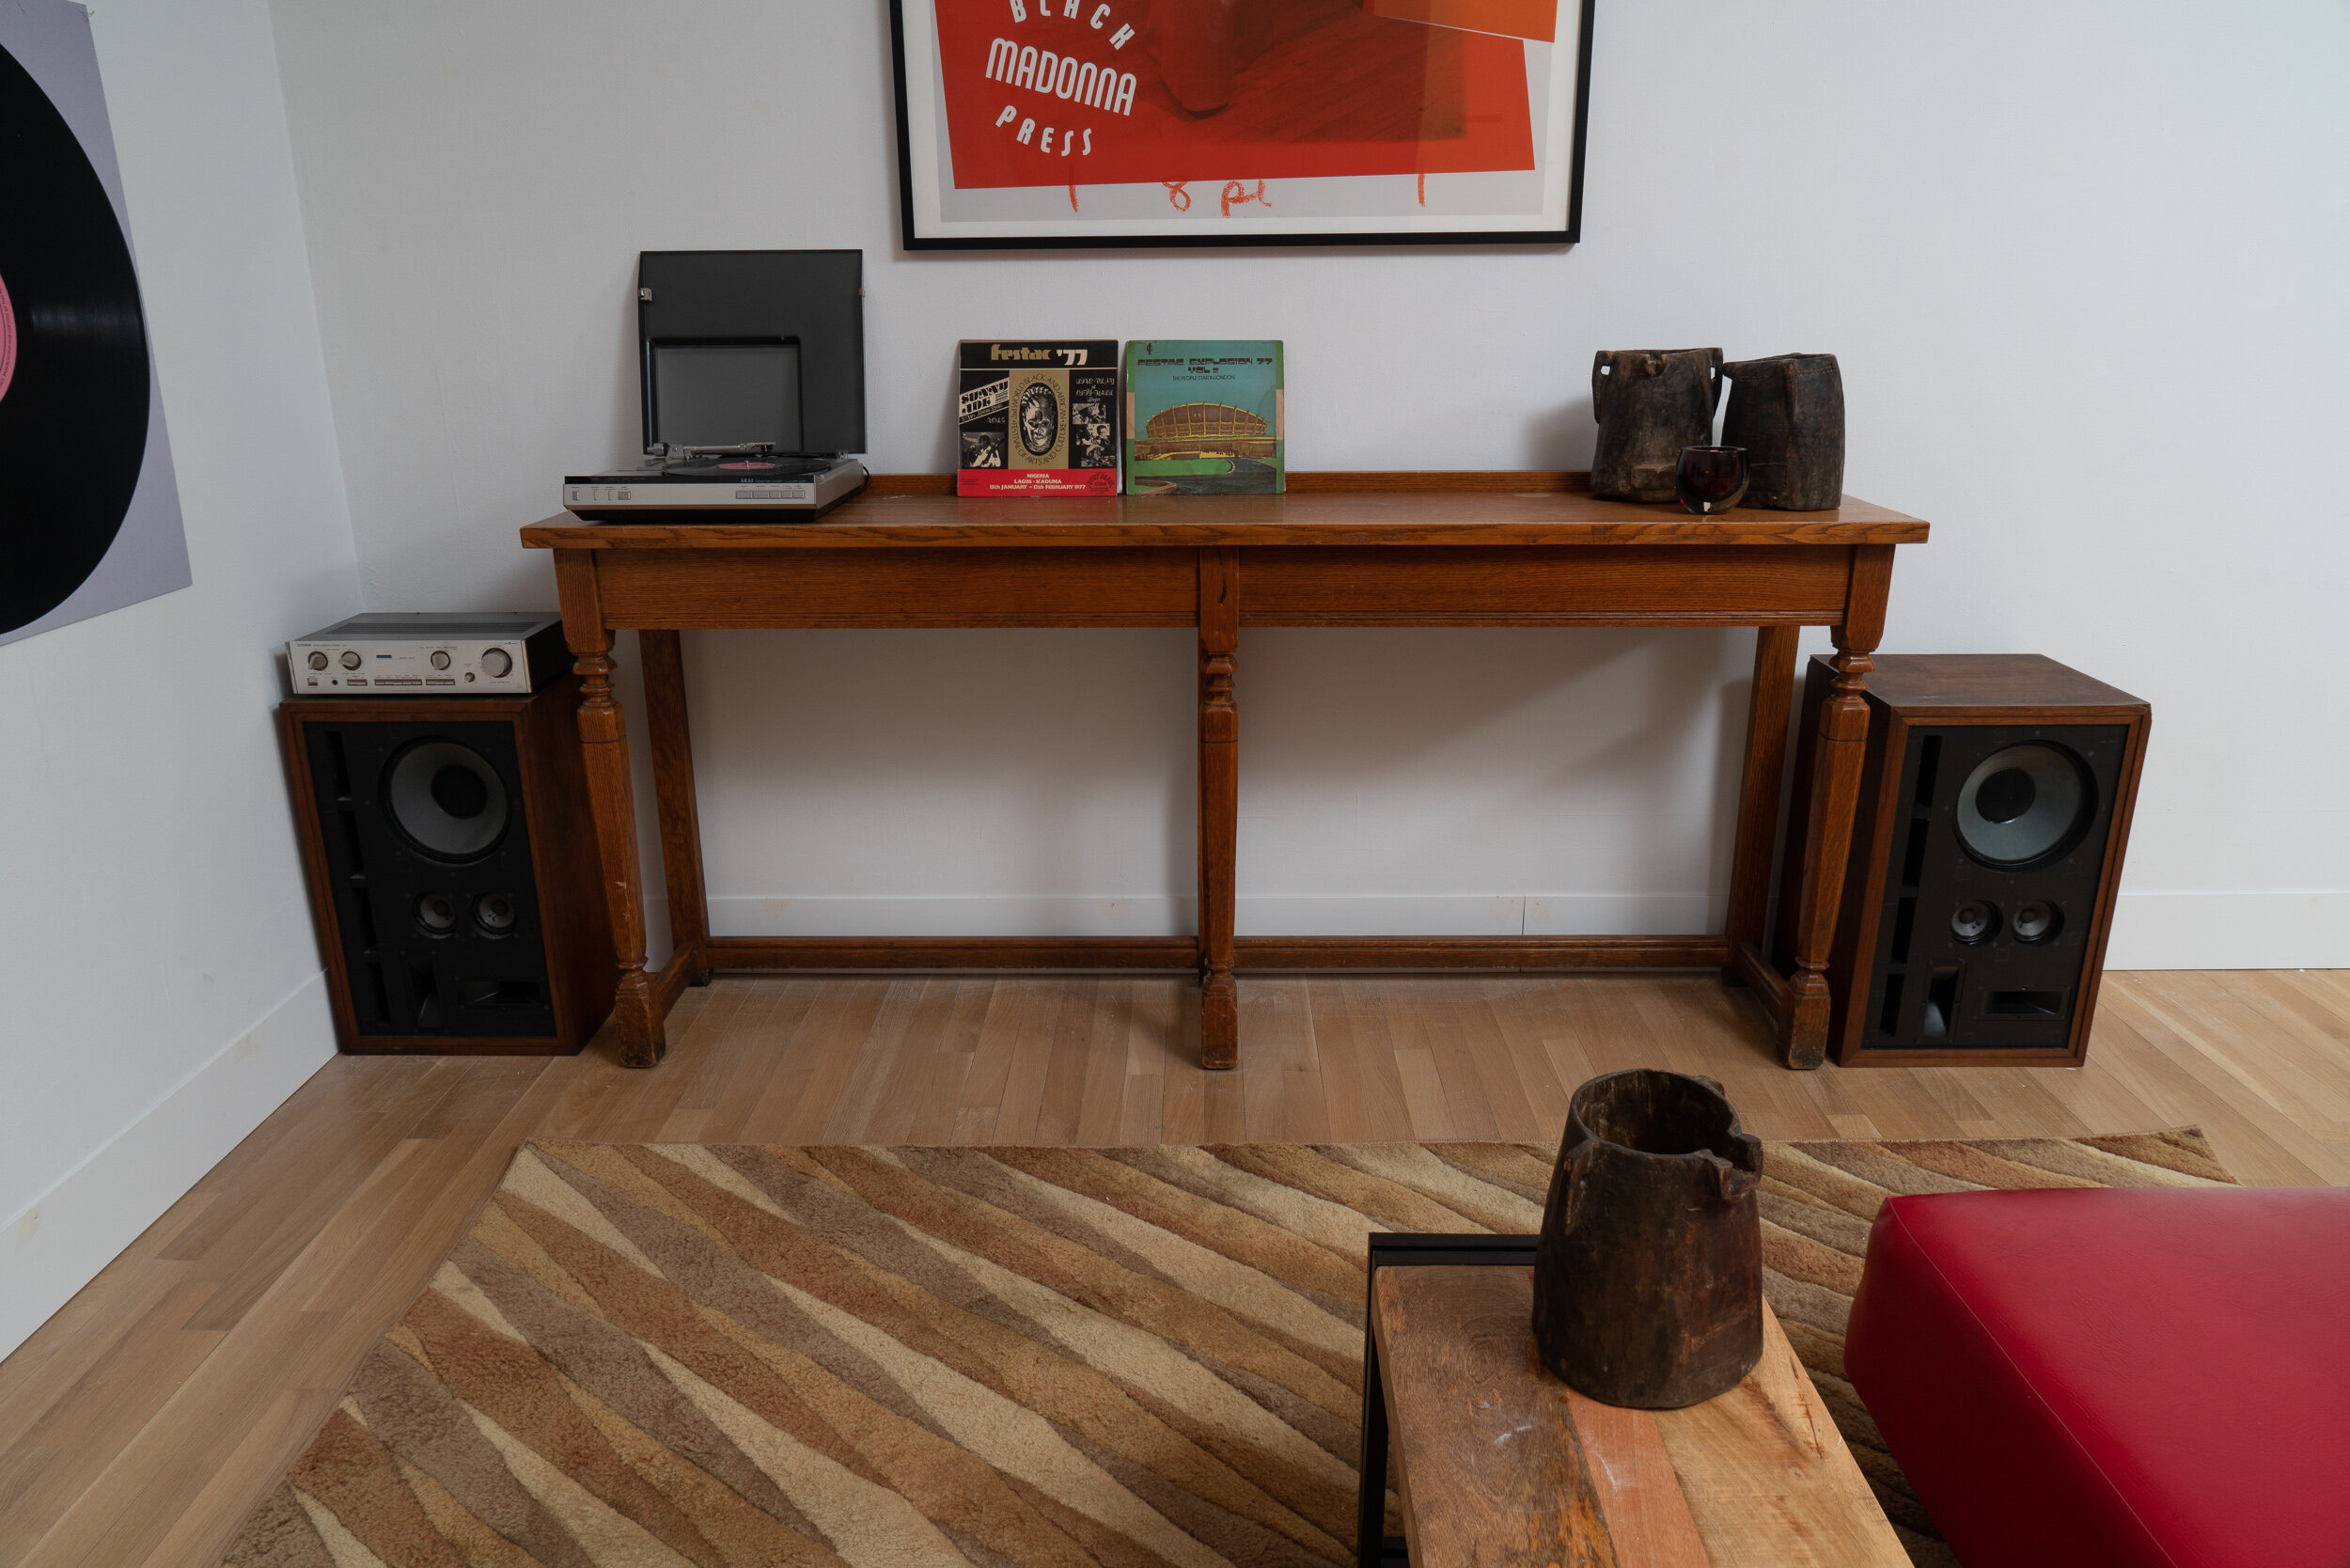  Ayrika Hall and Cortlyn Kelly,  The Story of Sound: A Look at FESTAC ‘77 and the Evolution of Music,  2020. Installation view in the Logan Center Gallery. Various furniture, ephemera, speakers, and music playlist. Photo by Robert Chase Heishman 